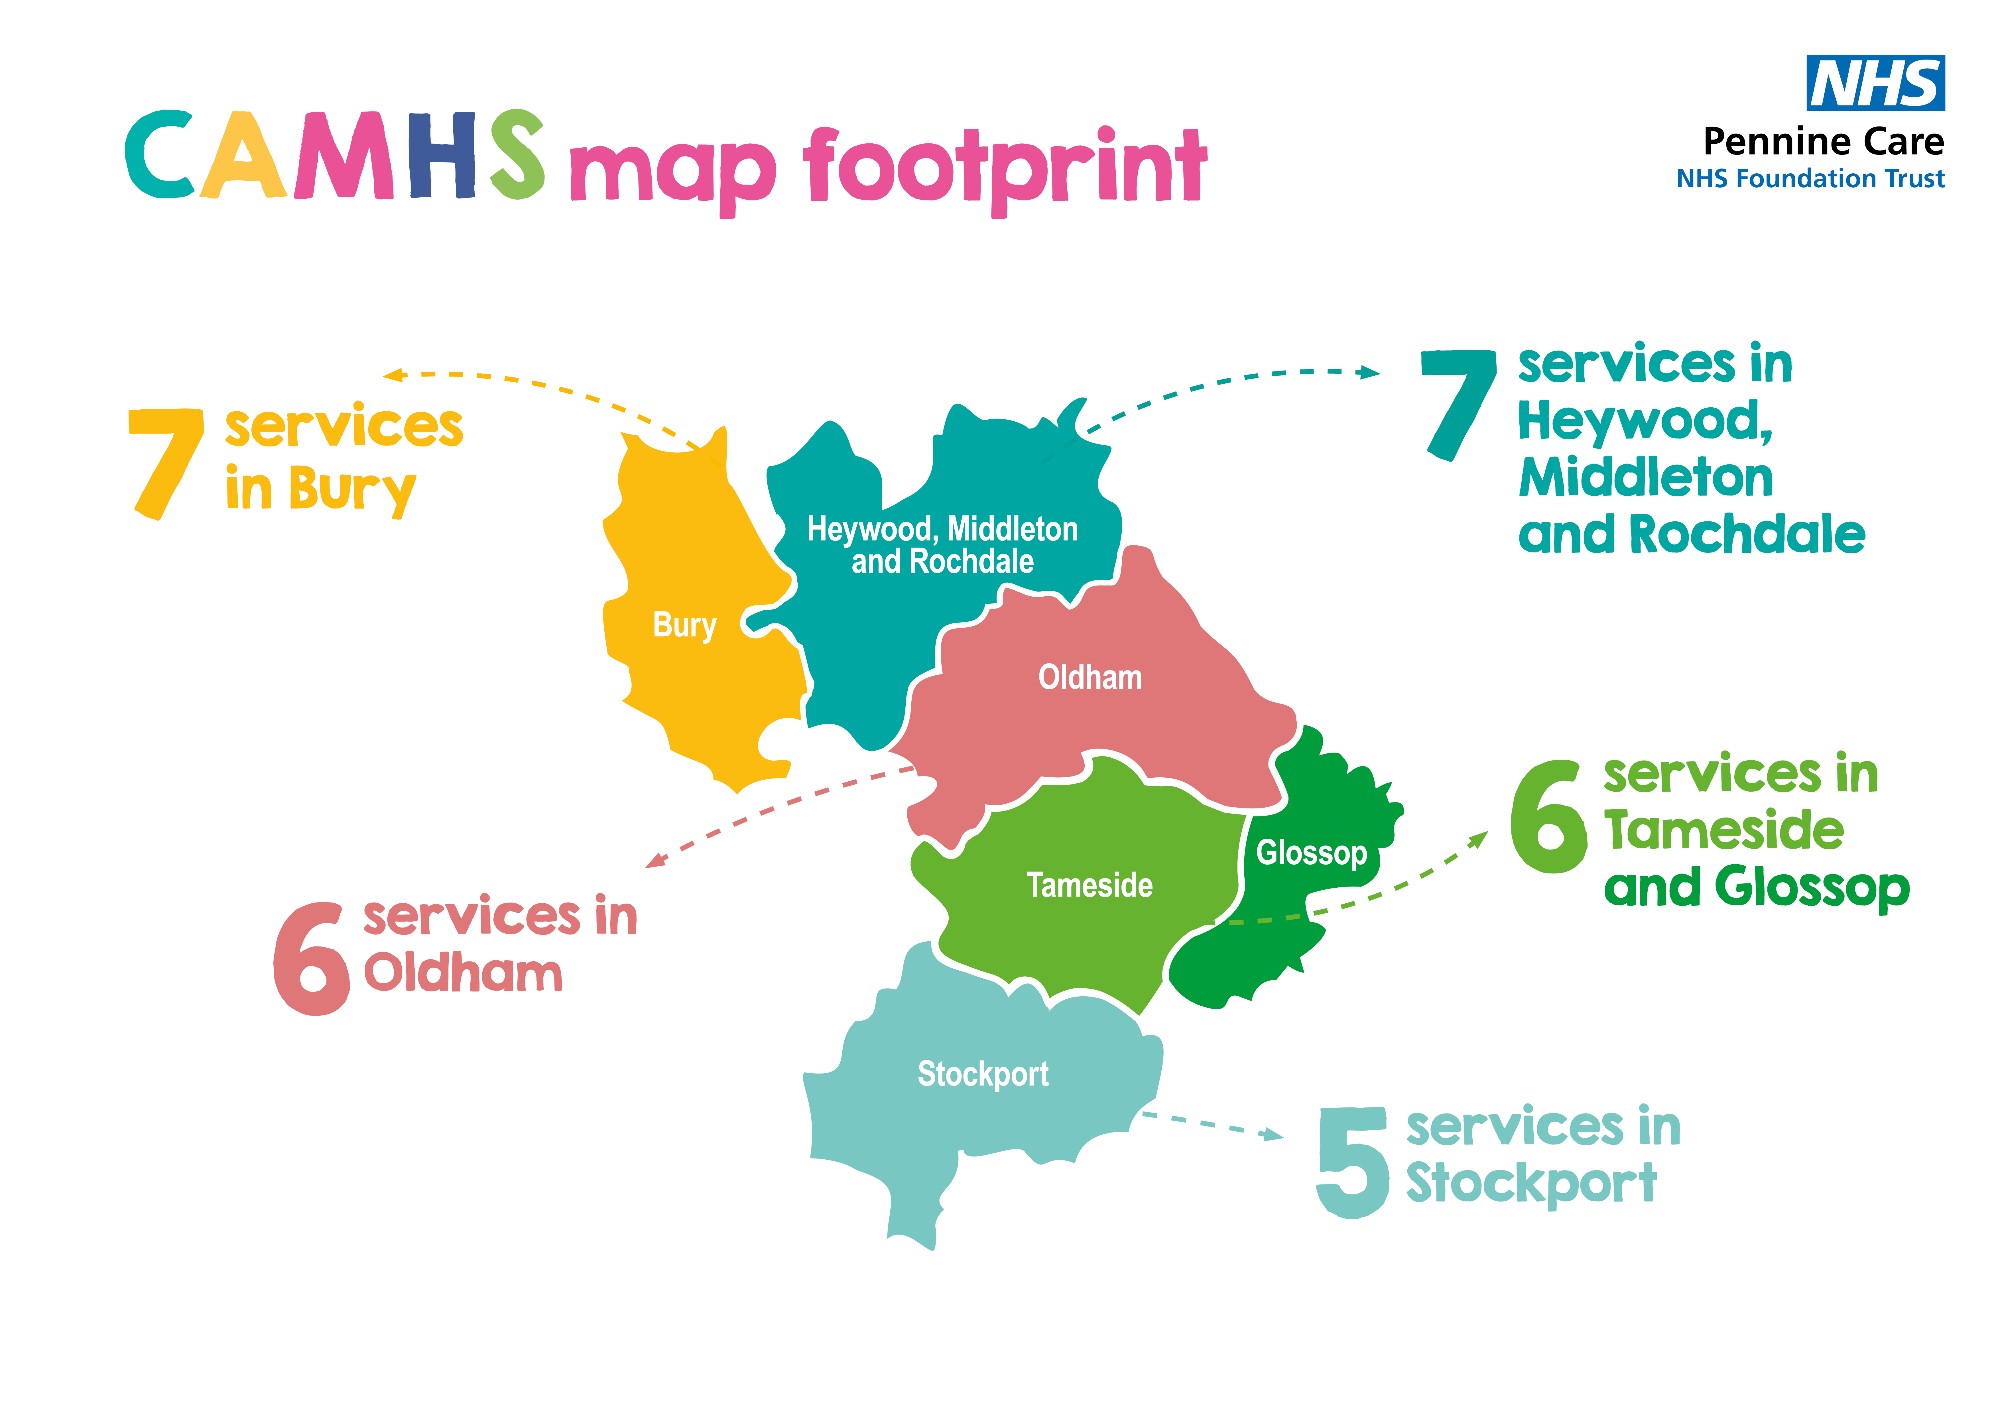 A map of Pennine Care boroughs with number of services in each.jpg